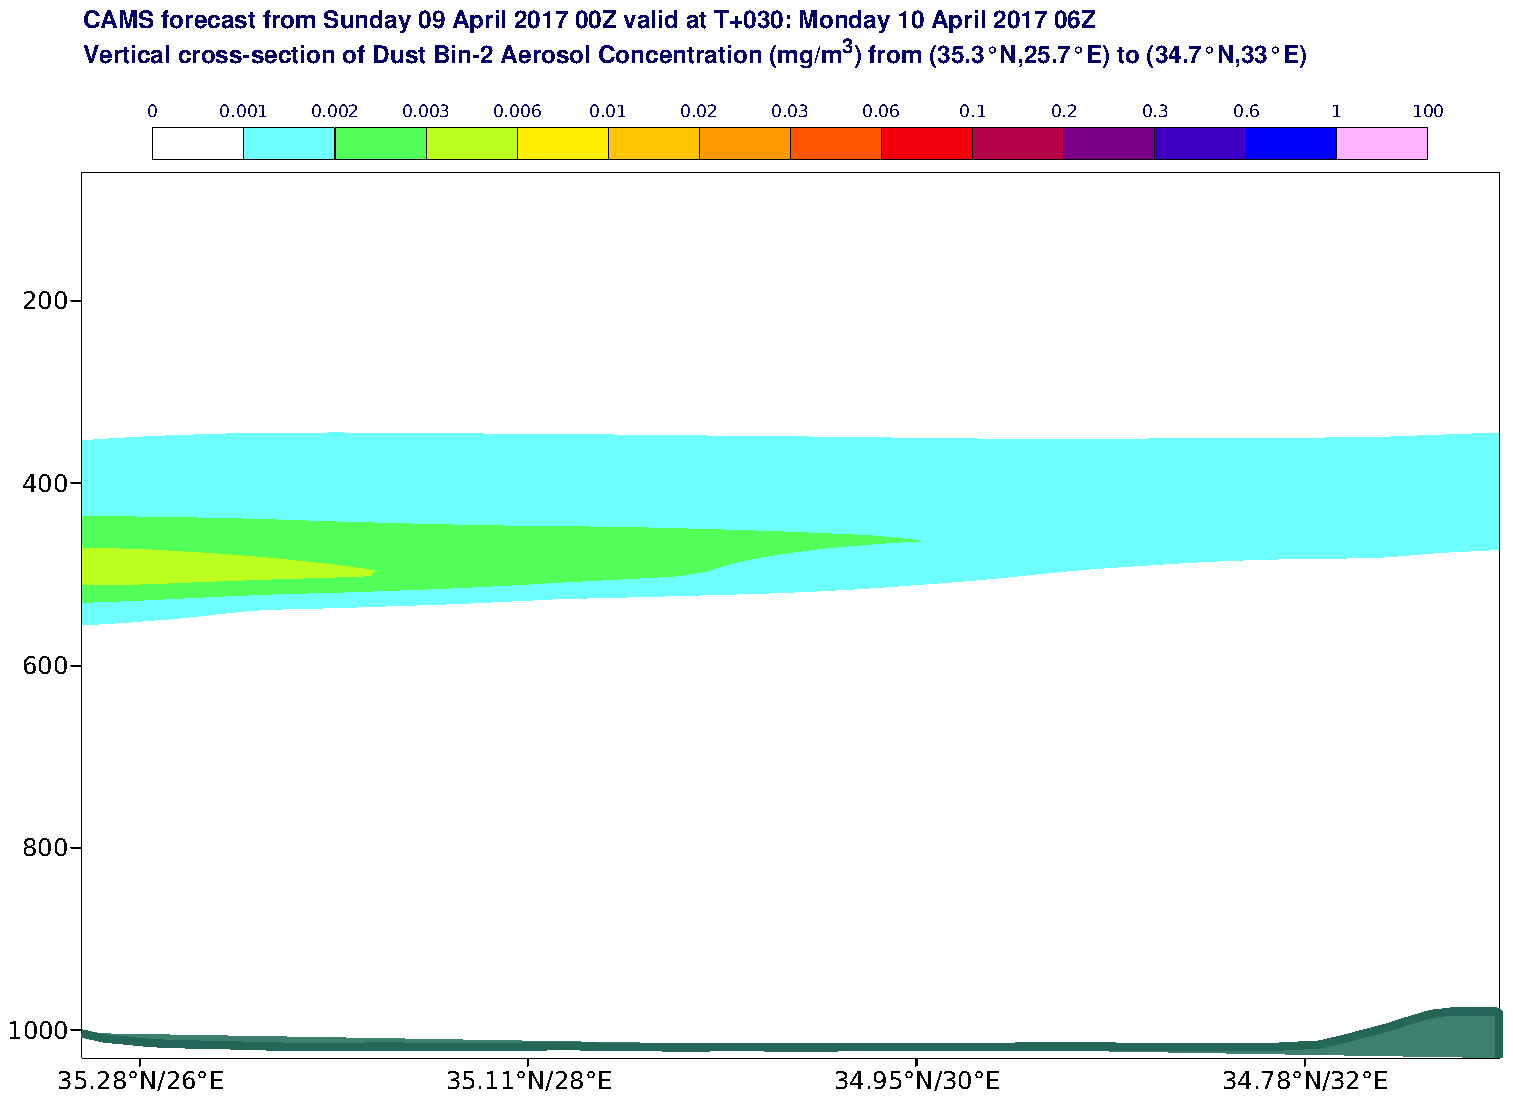 Vertical cross-section of Dust Bin-2 Aerosol Concentration (mg/m3) valid at T30 - 2017-04-10 06:00